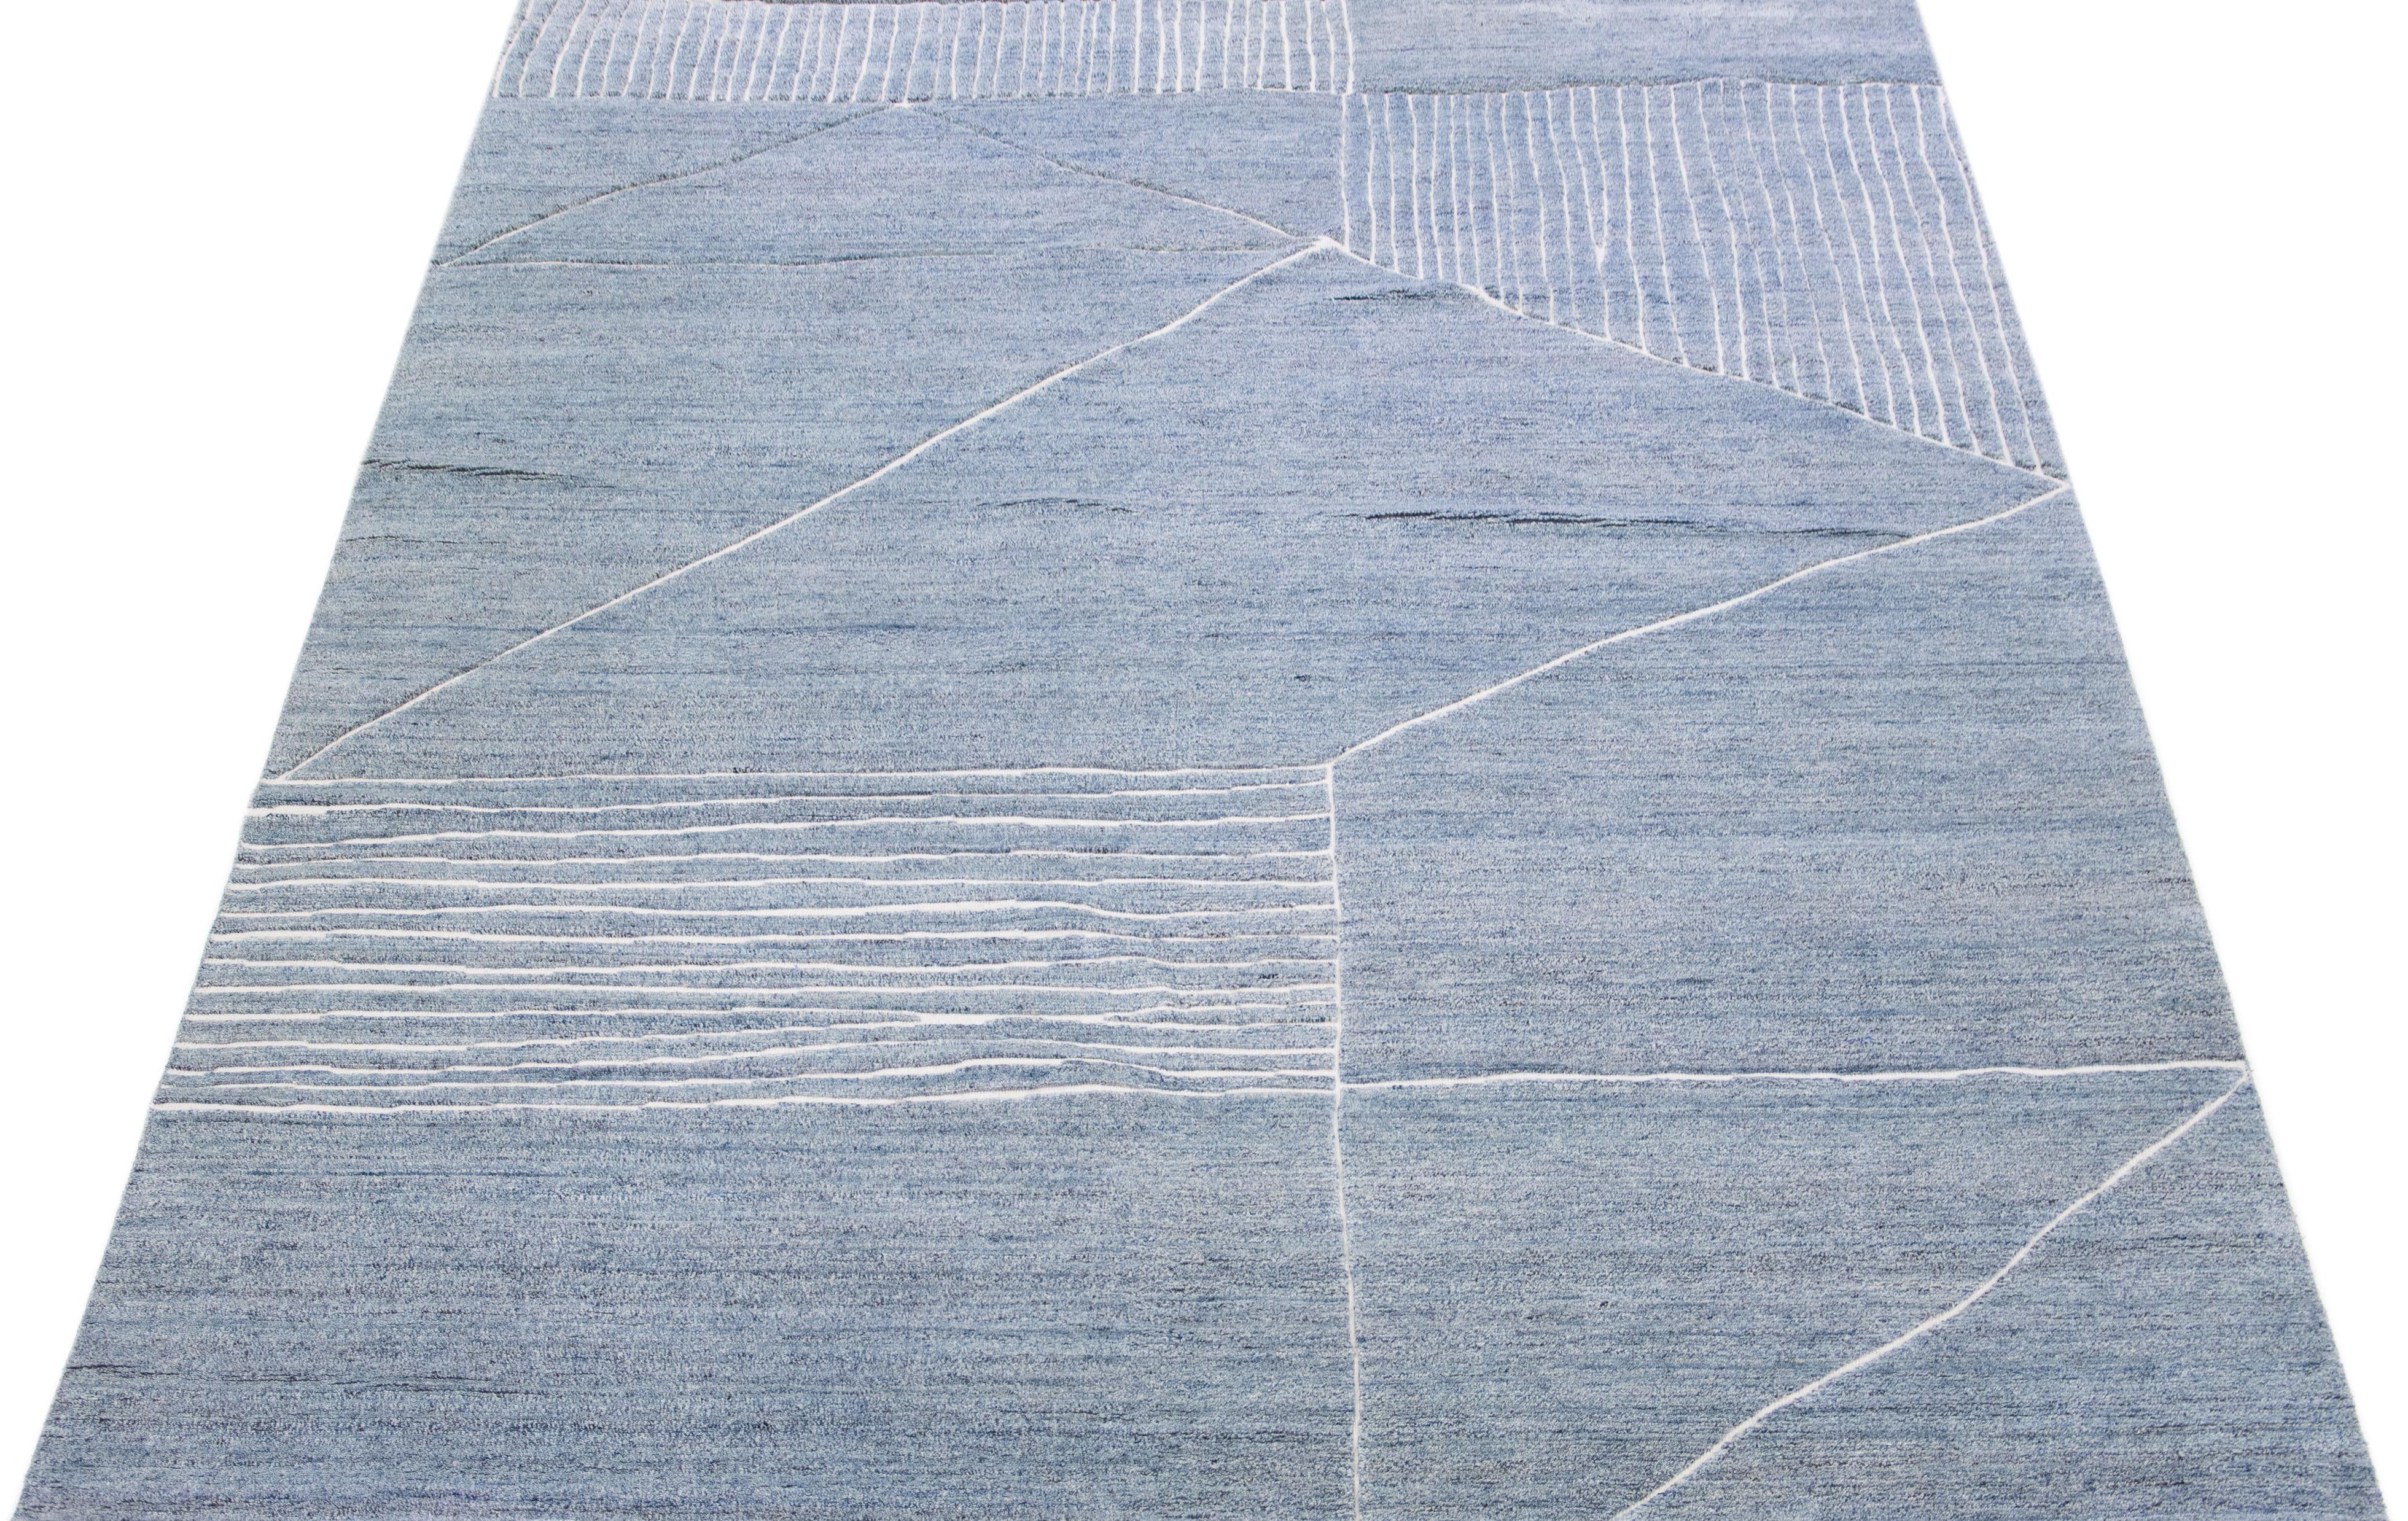 Beautiful modern Moroccan-style hand-knotted wool rug with a light blue color field. This rug is part of our Apadana's Safi Collection and features a geometric design in white.

This rug measures: 10' x 13'10